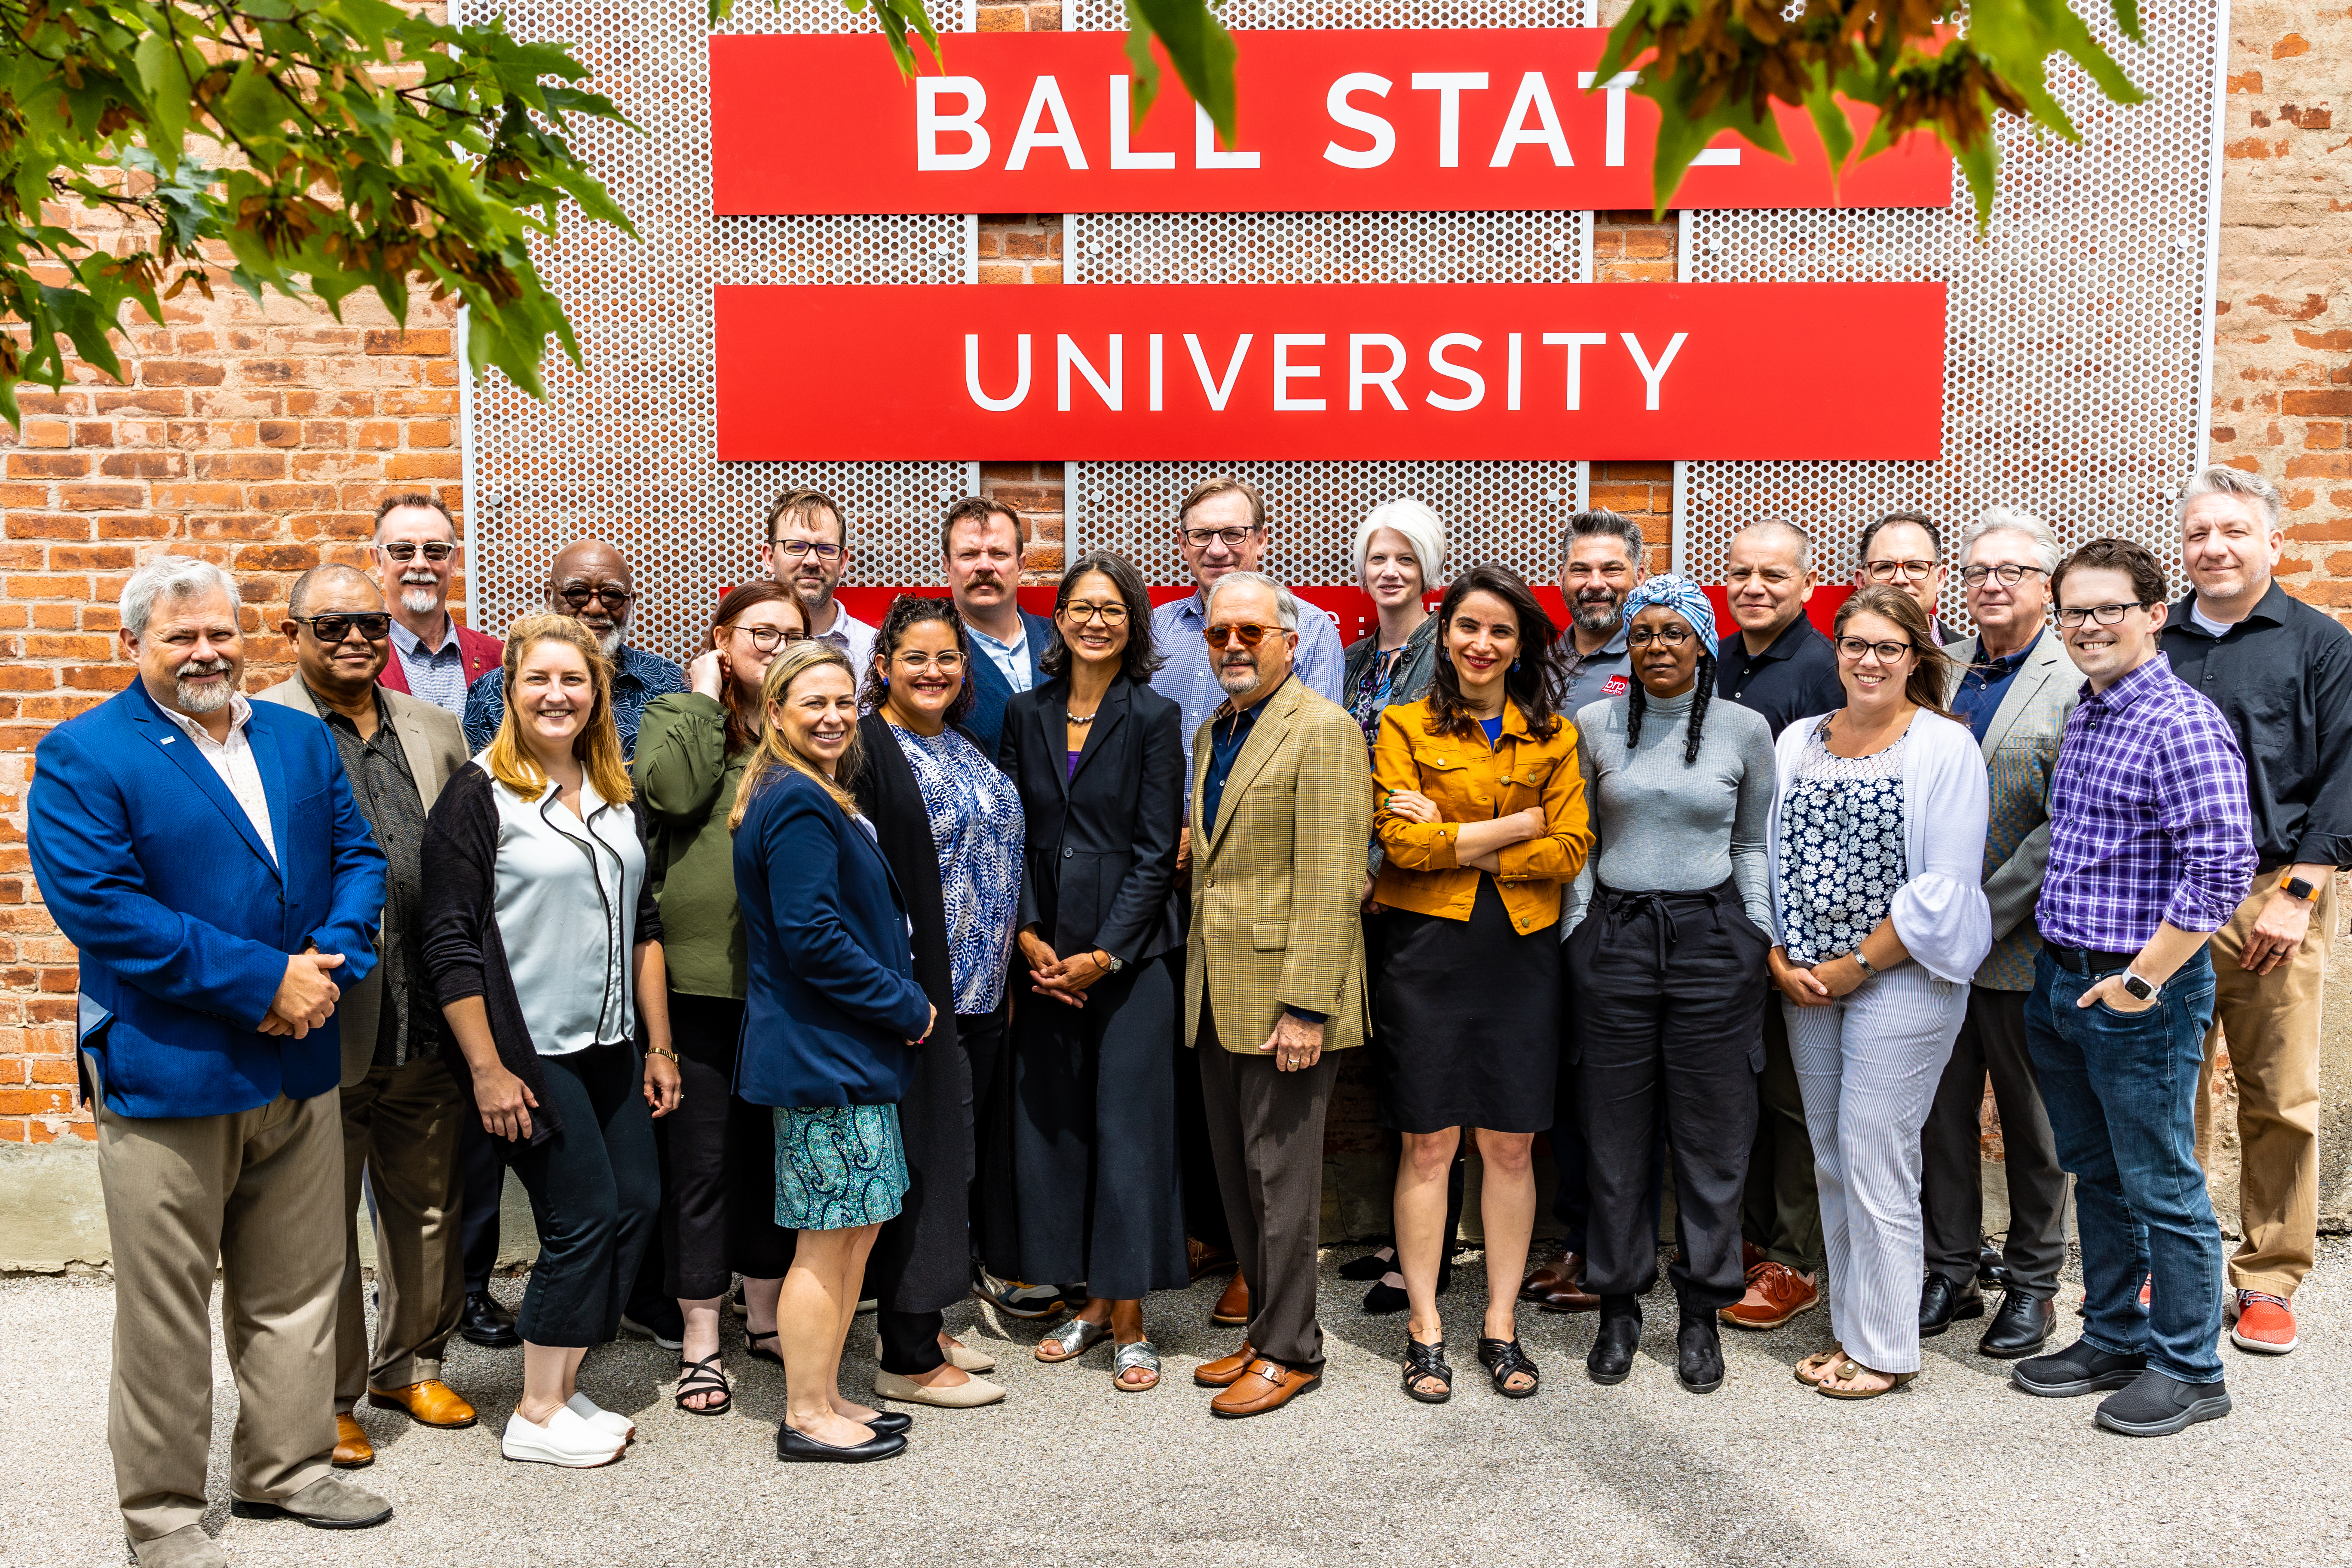 All of the 2023 Scholars attendees pose for a group photo in front of a Ball State University sign.